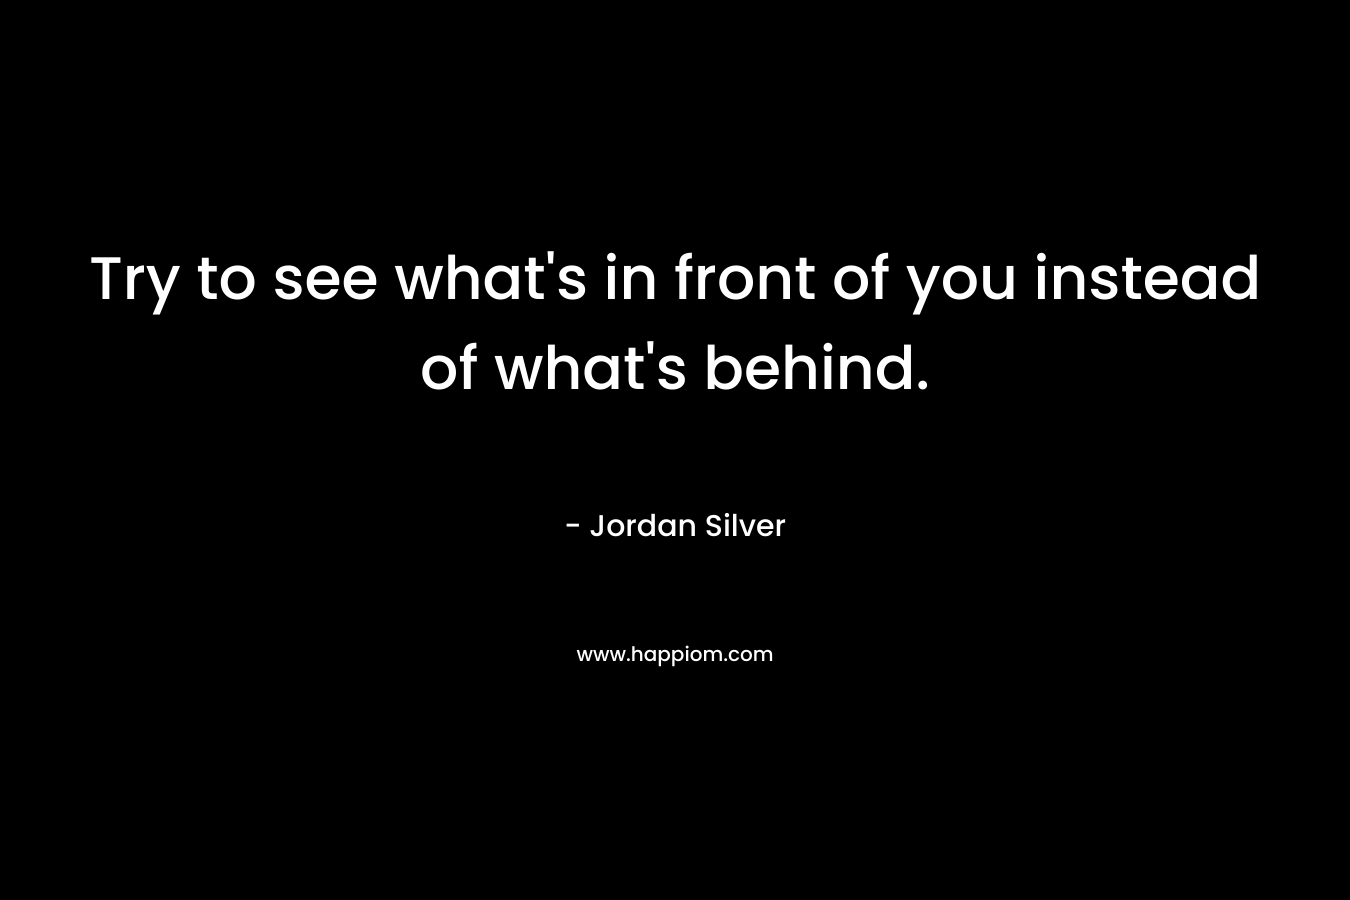 Try to see what’s in front of you instead of what’s behind. – Jordan Silver